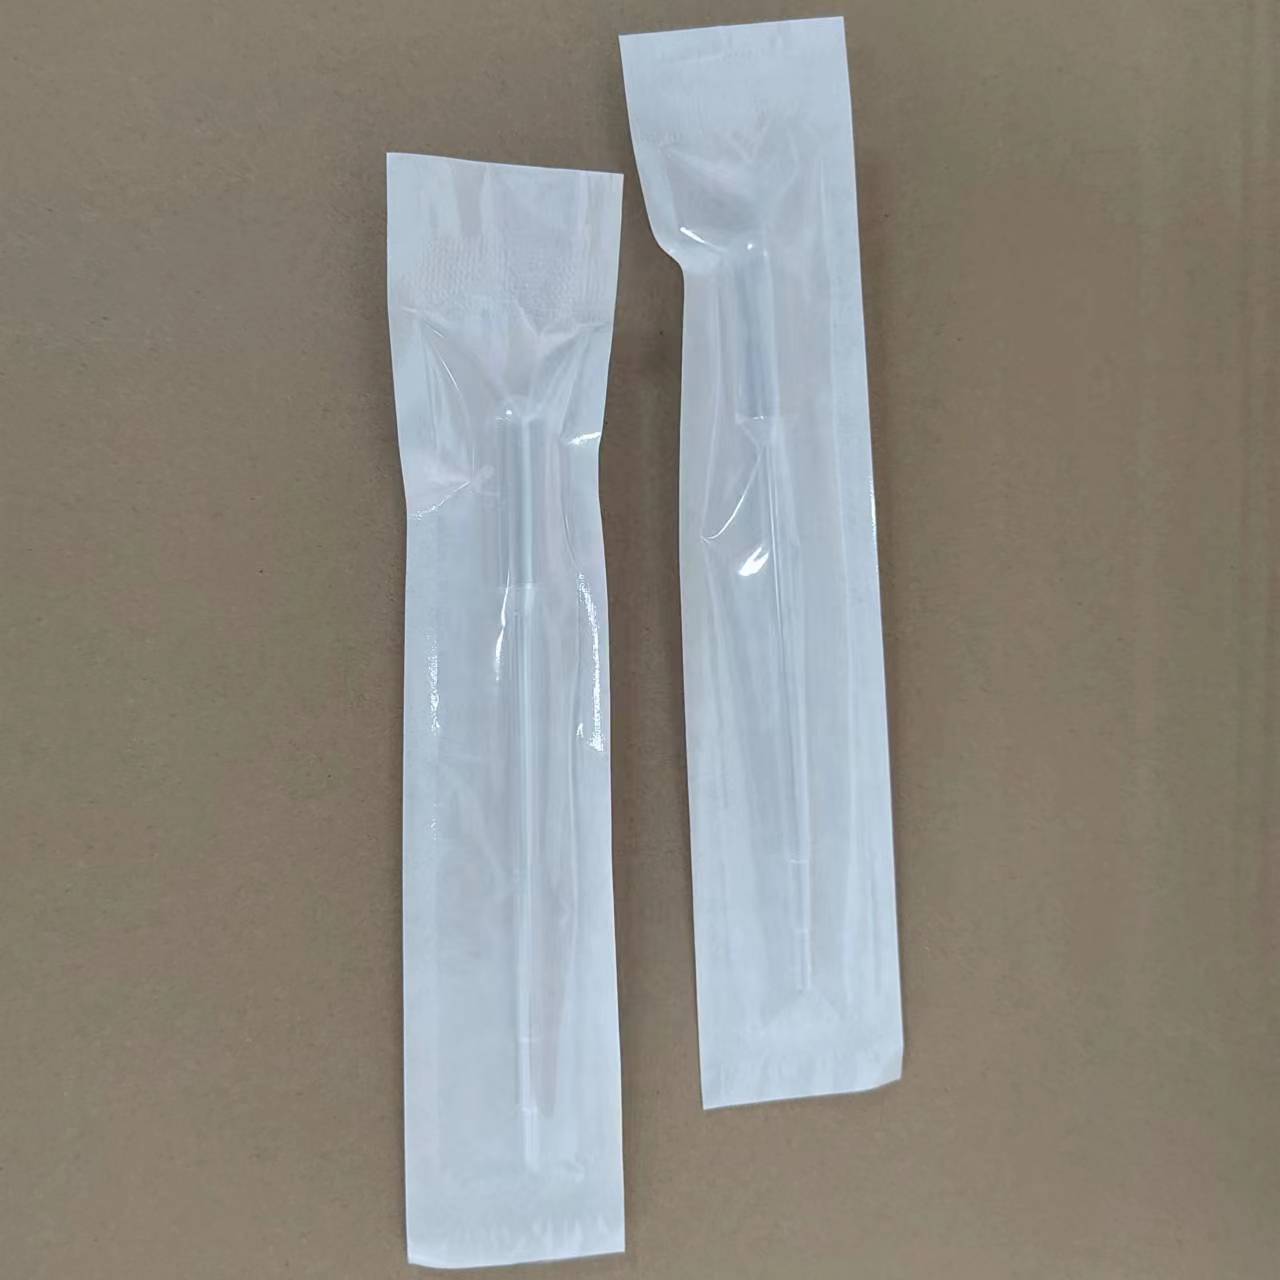 Plastic Transfer Pipettes 3ml, Graduated, Pack of 100